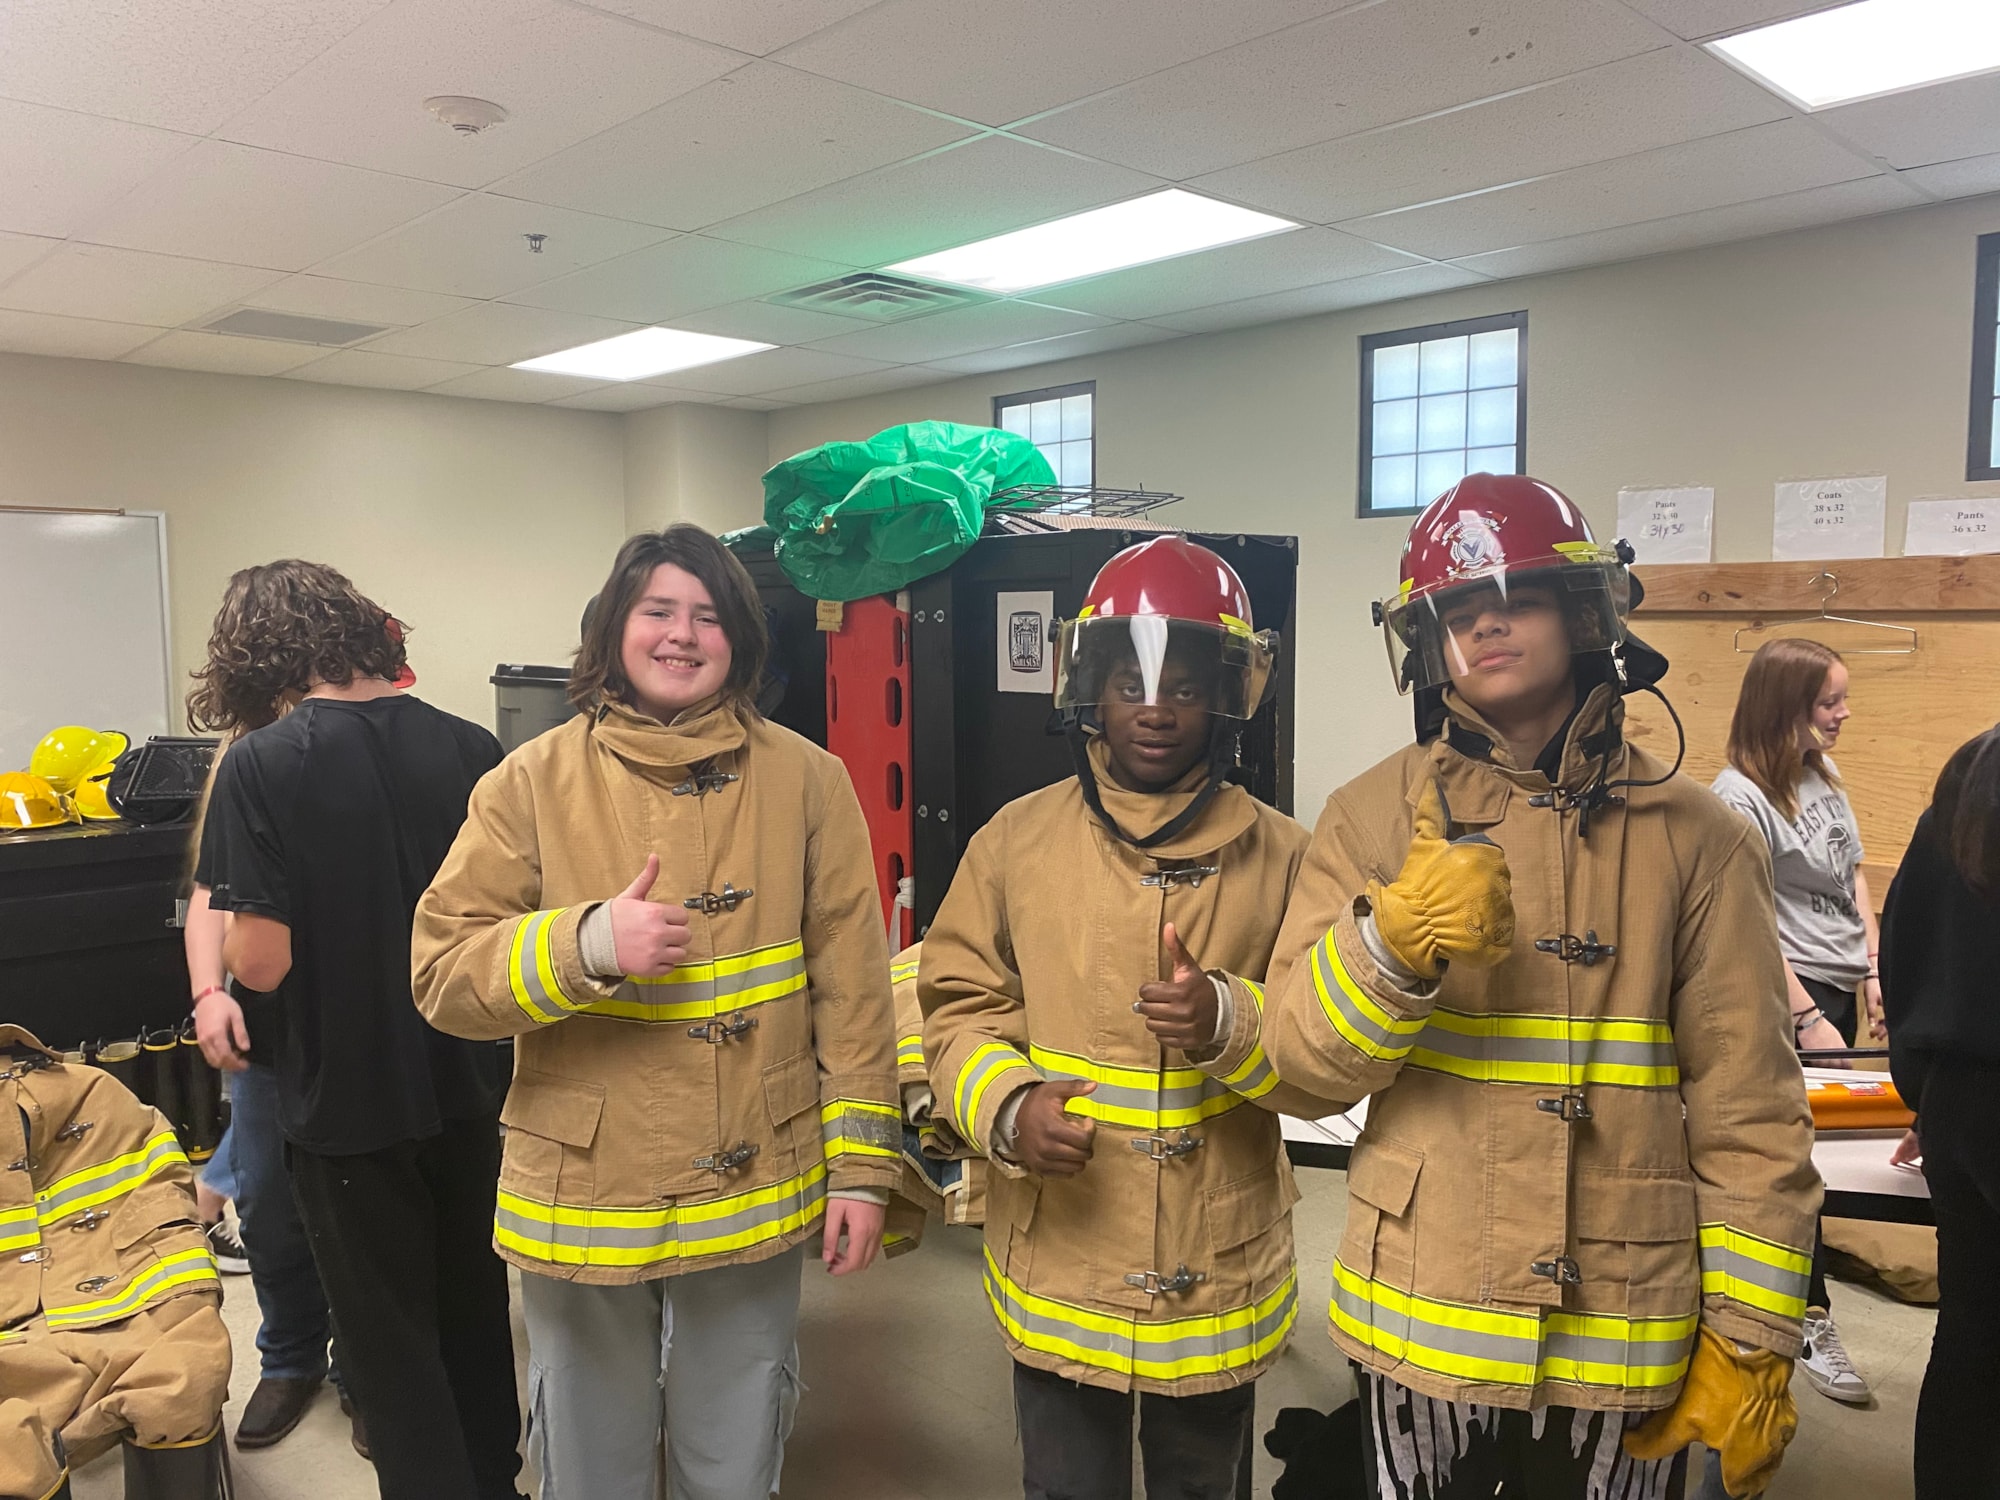 3 students pose with fire gear on